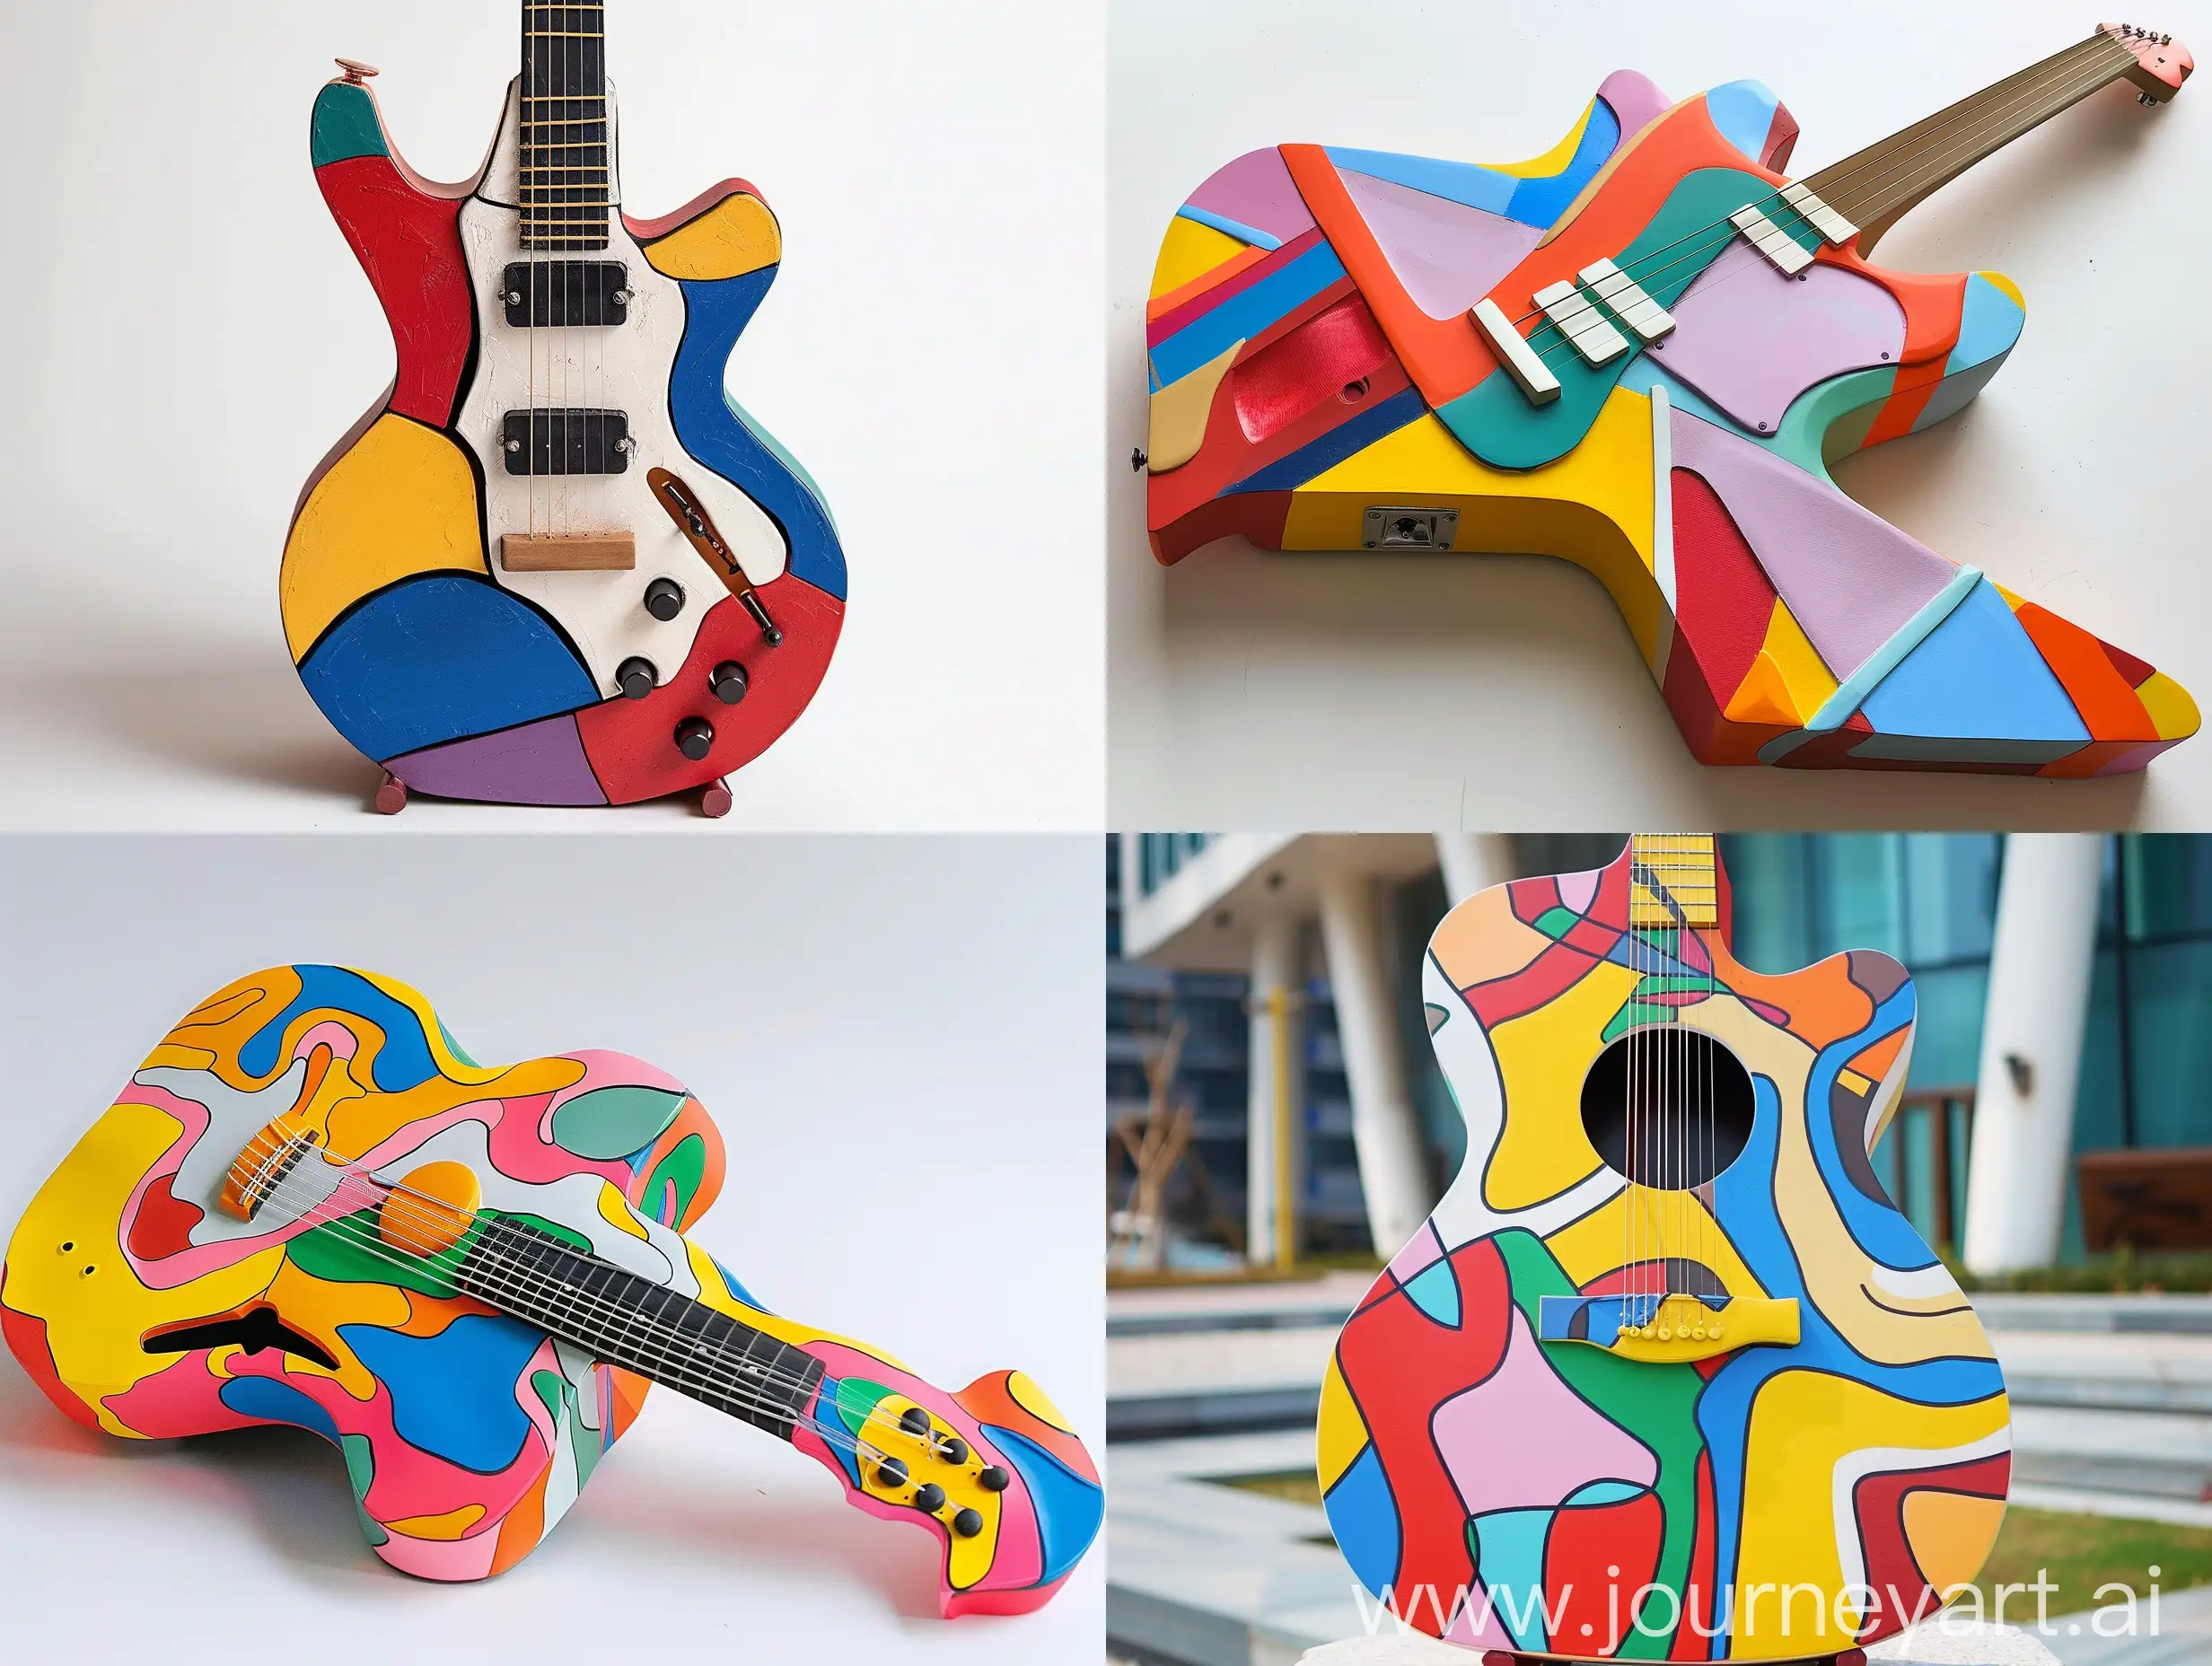 Brightly colored, minimalist guitar sculpture with dynamic artist Lee Sangsoo style